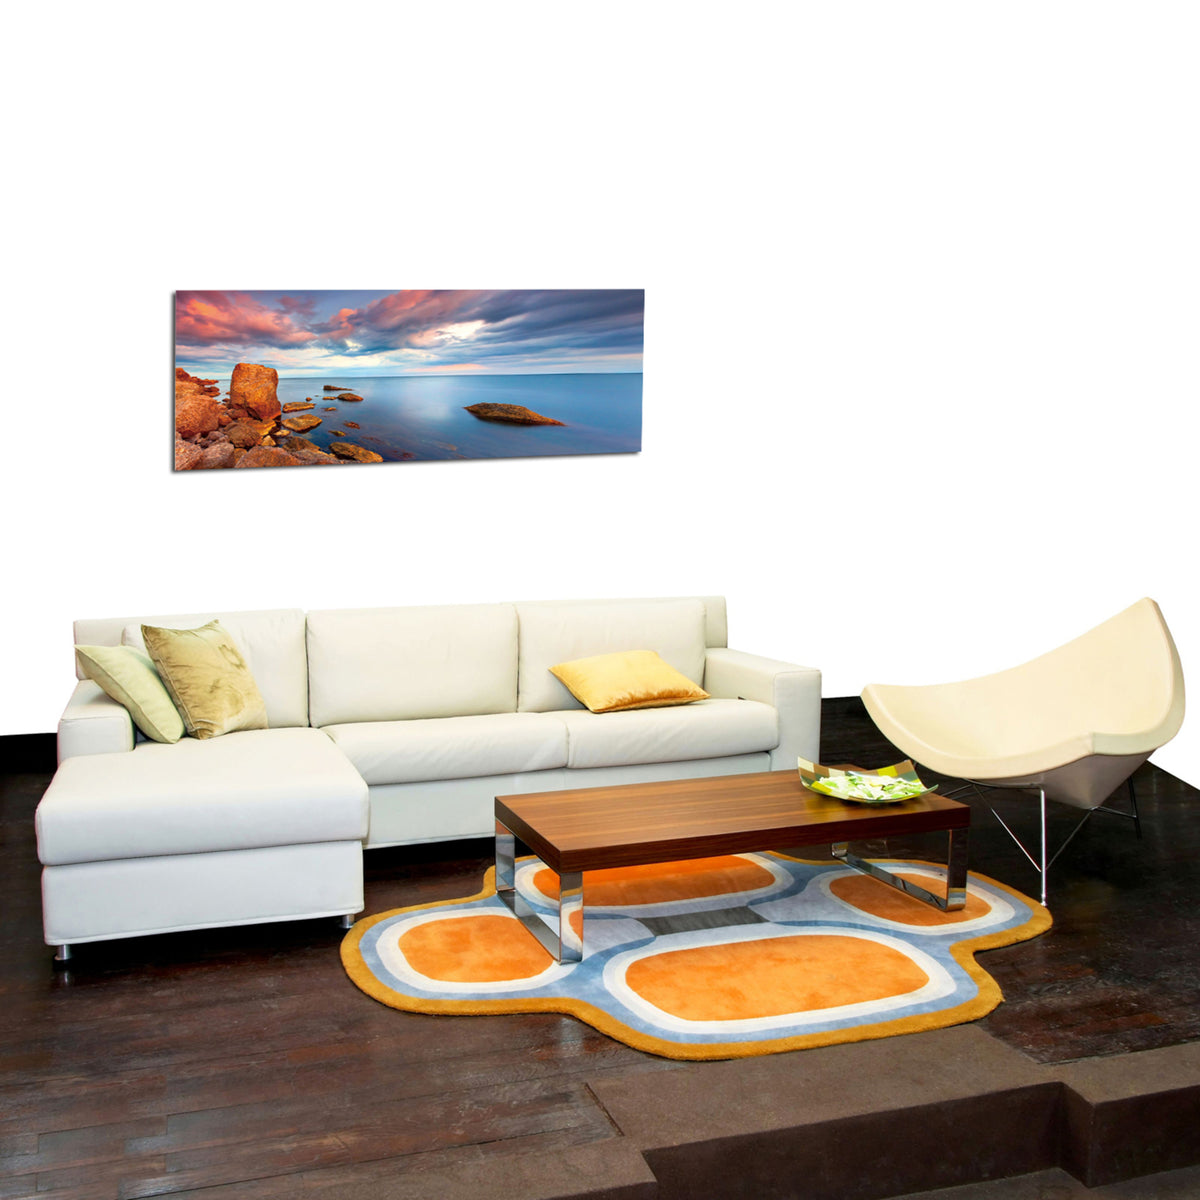 Epic Graffiti &quot;Red Rock Lake&quot; in a High Gloss Acrylic Wall Art, 60&quot; x 20&quot;